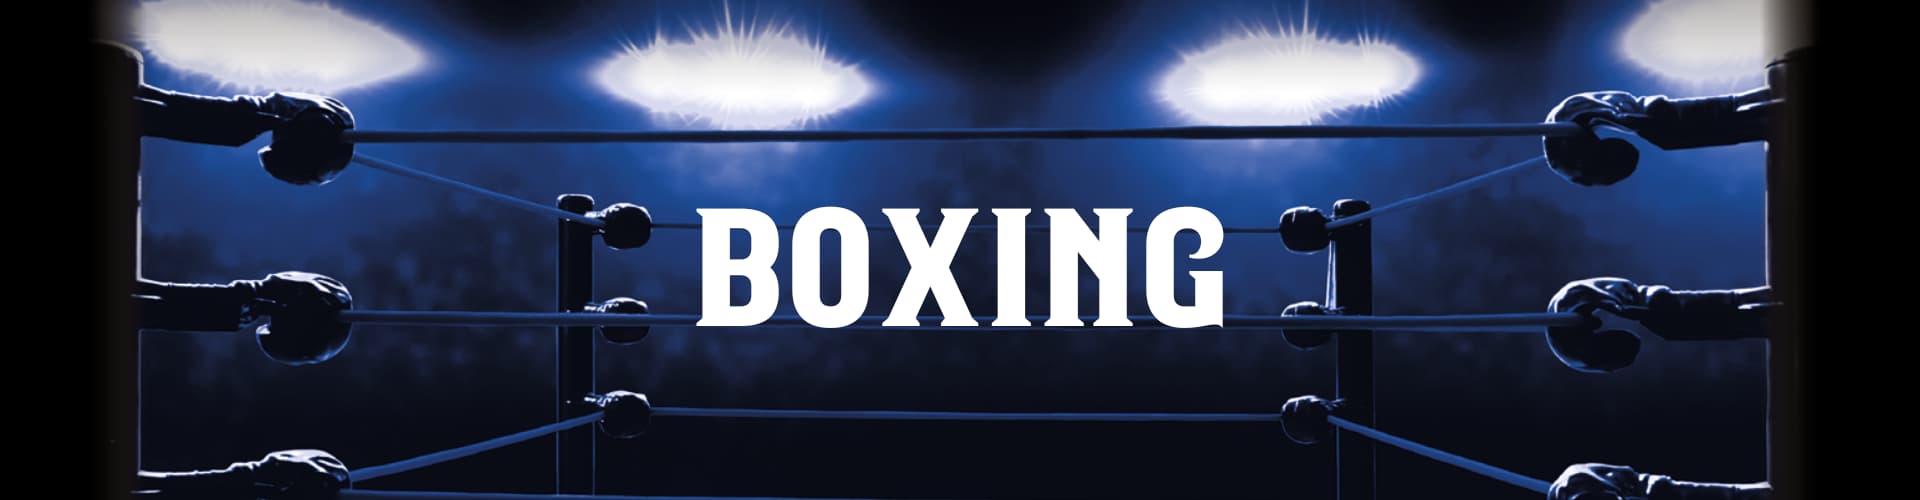 Watch Live Boxing in London at Three Tuns Pub